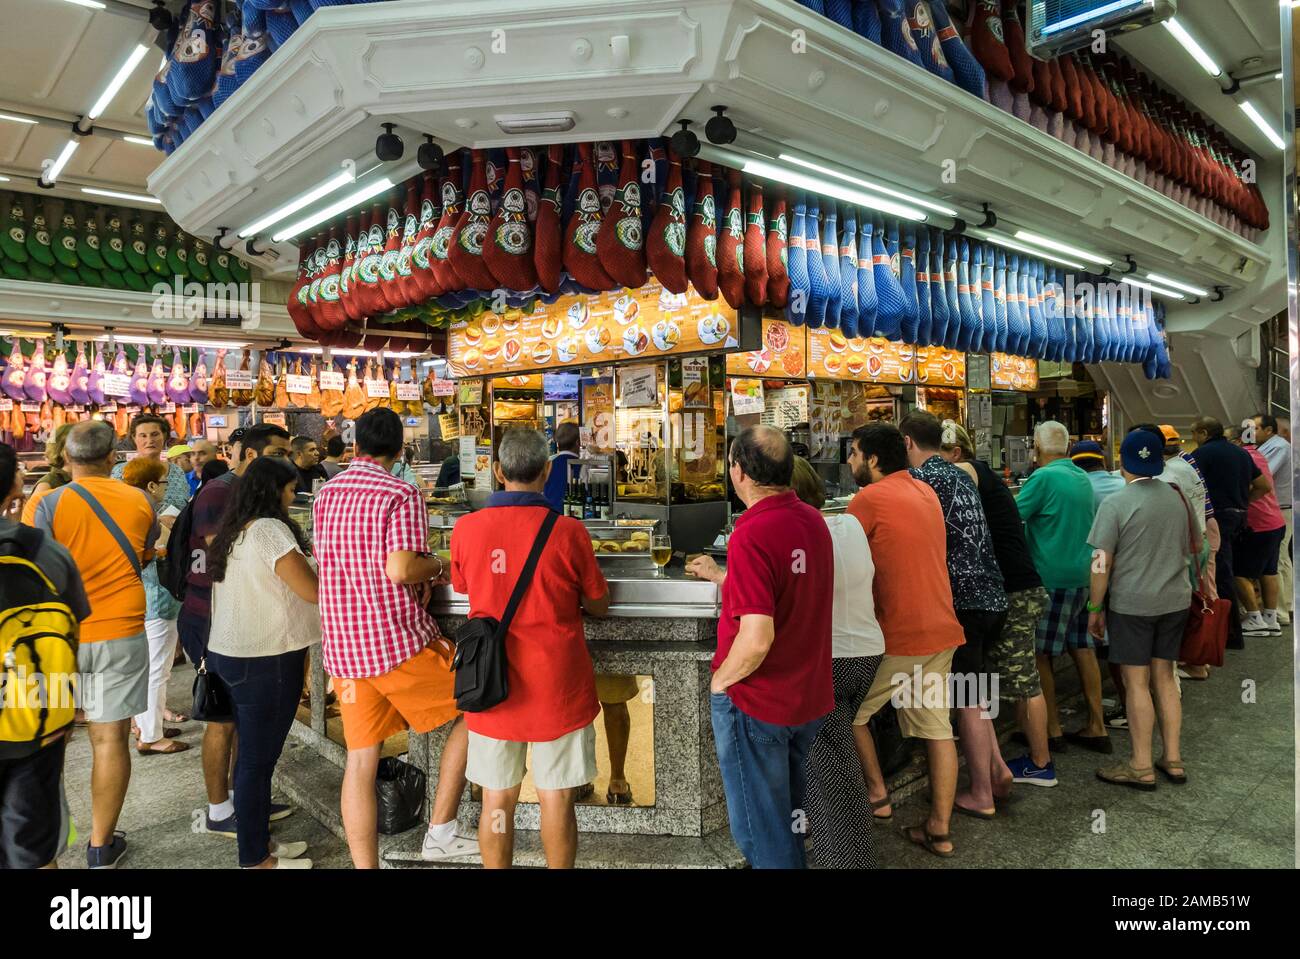 A typical Tapas bar in Madrid, Spain Stock Photo